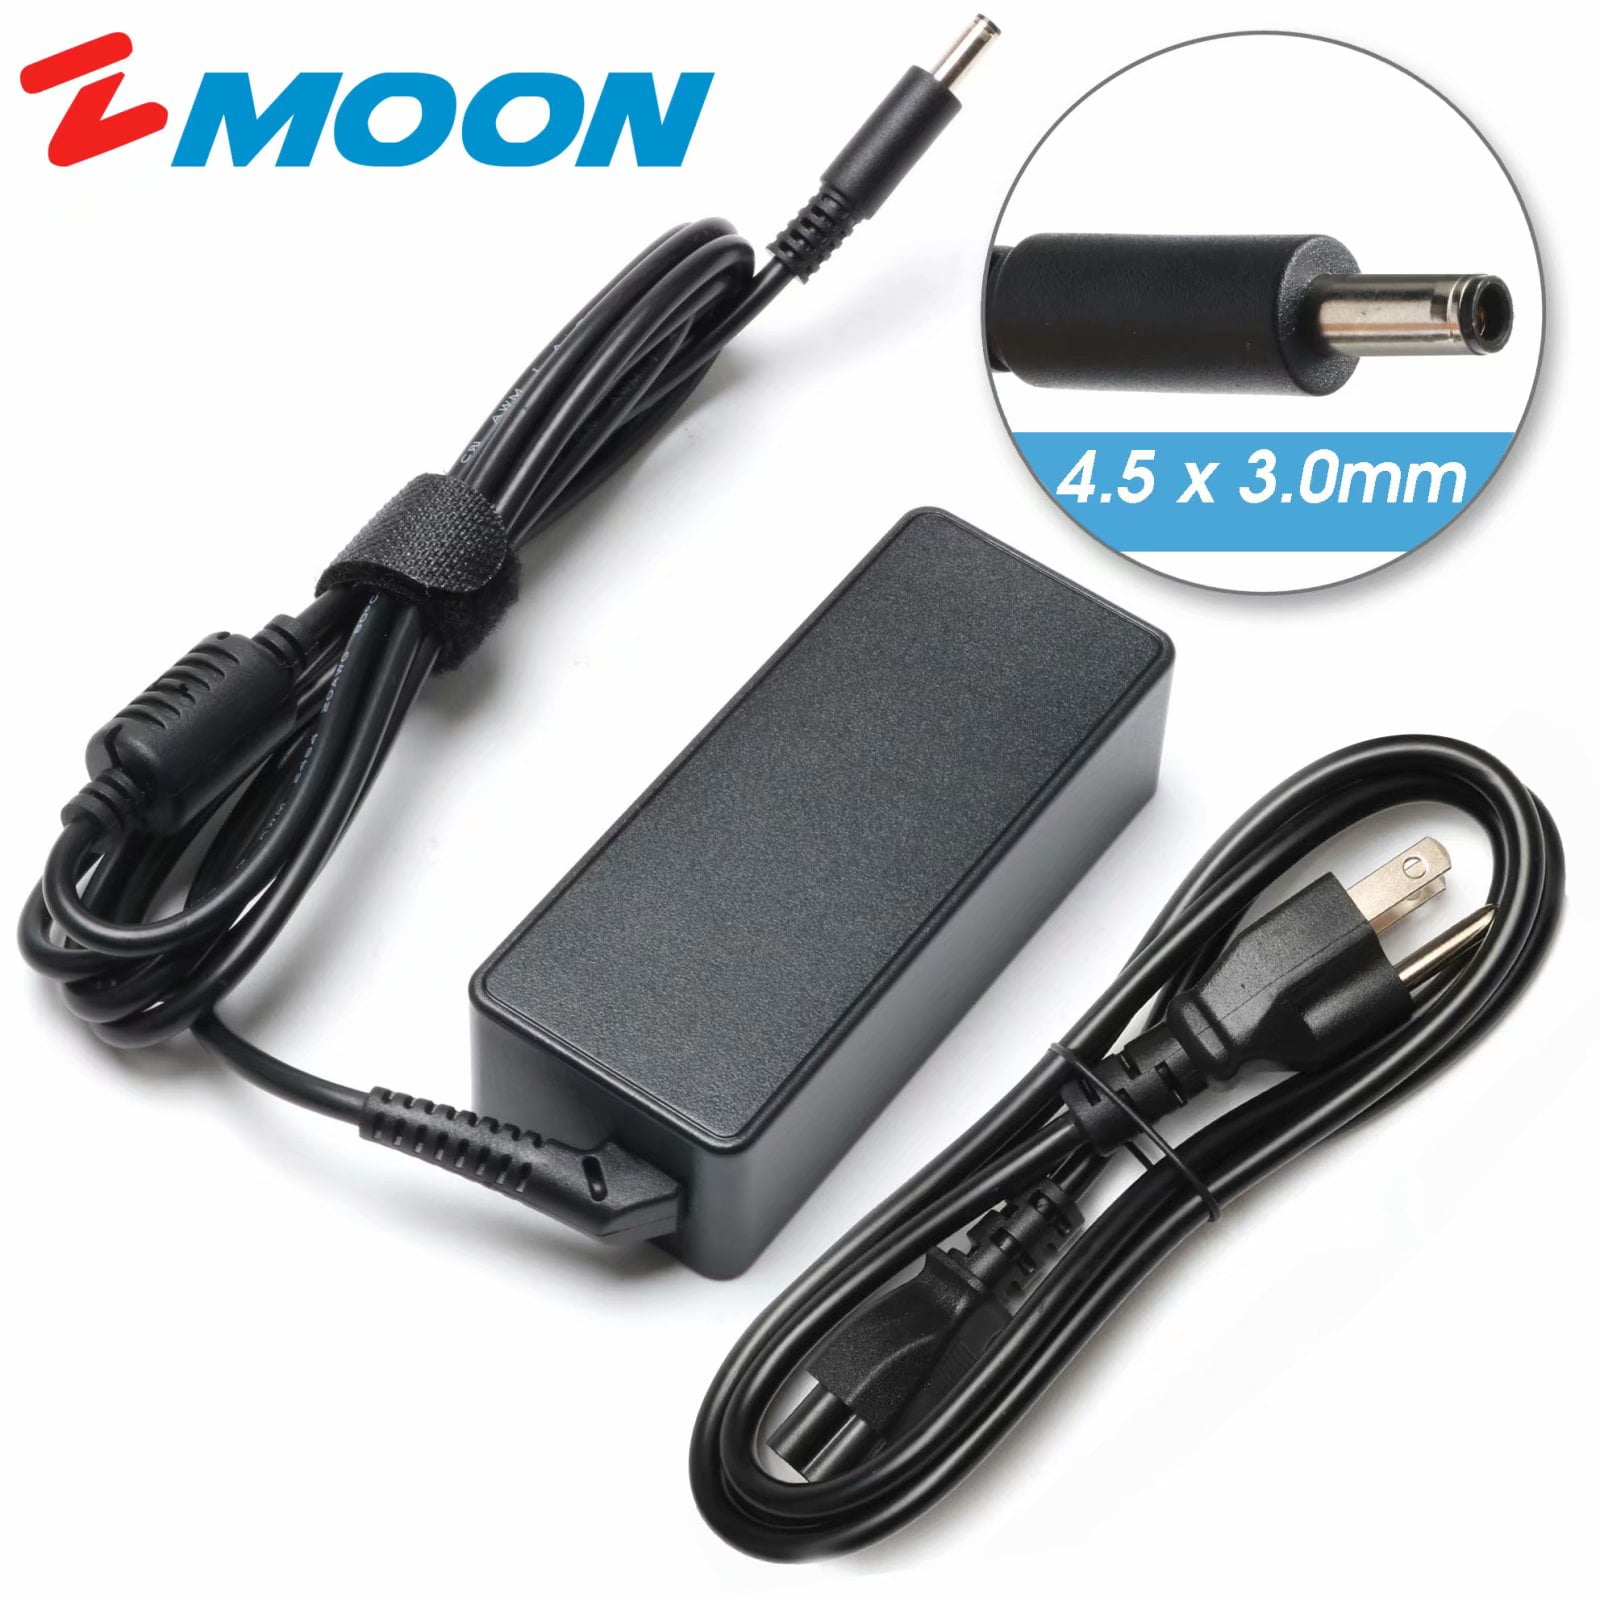 Mouse Latitude and HDMI Cable for Dell Inspiron VG Bags Ultra-Slim Black 14-inch Laptop Sleeve Bag with USB Hub Vostro 14 ChromeBook 